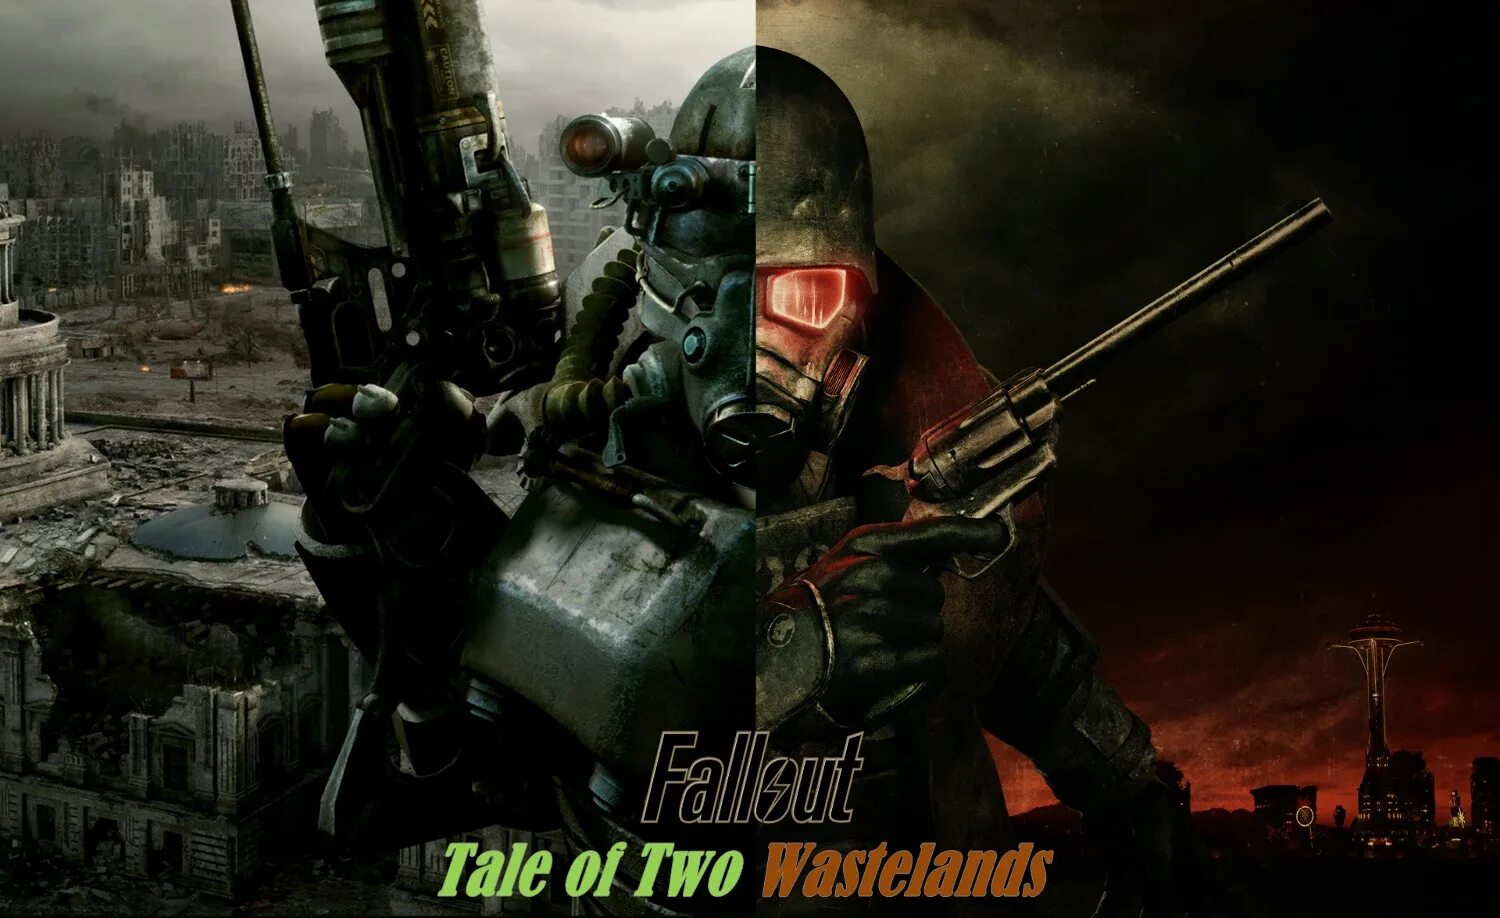 Two wastelands. Fallout Tale of two Wastelands. Fallout 3 Tale of two Wastelands. Fallout Tale of two Wastelands - Fate of Wanderer. Tale of two Wastelands Fallout New Vegas.